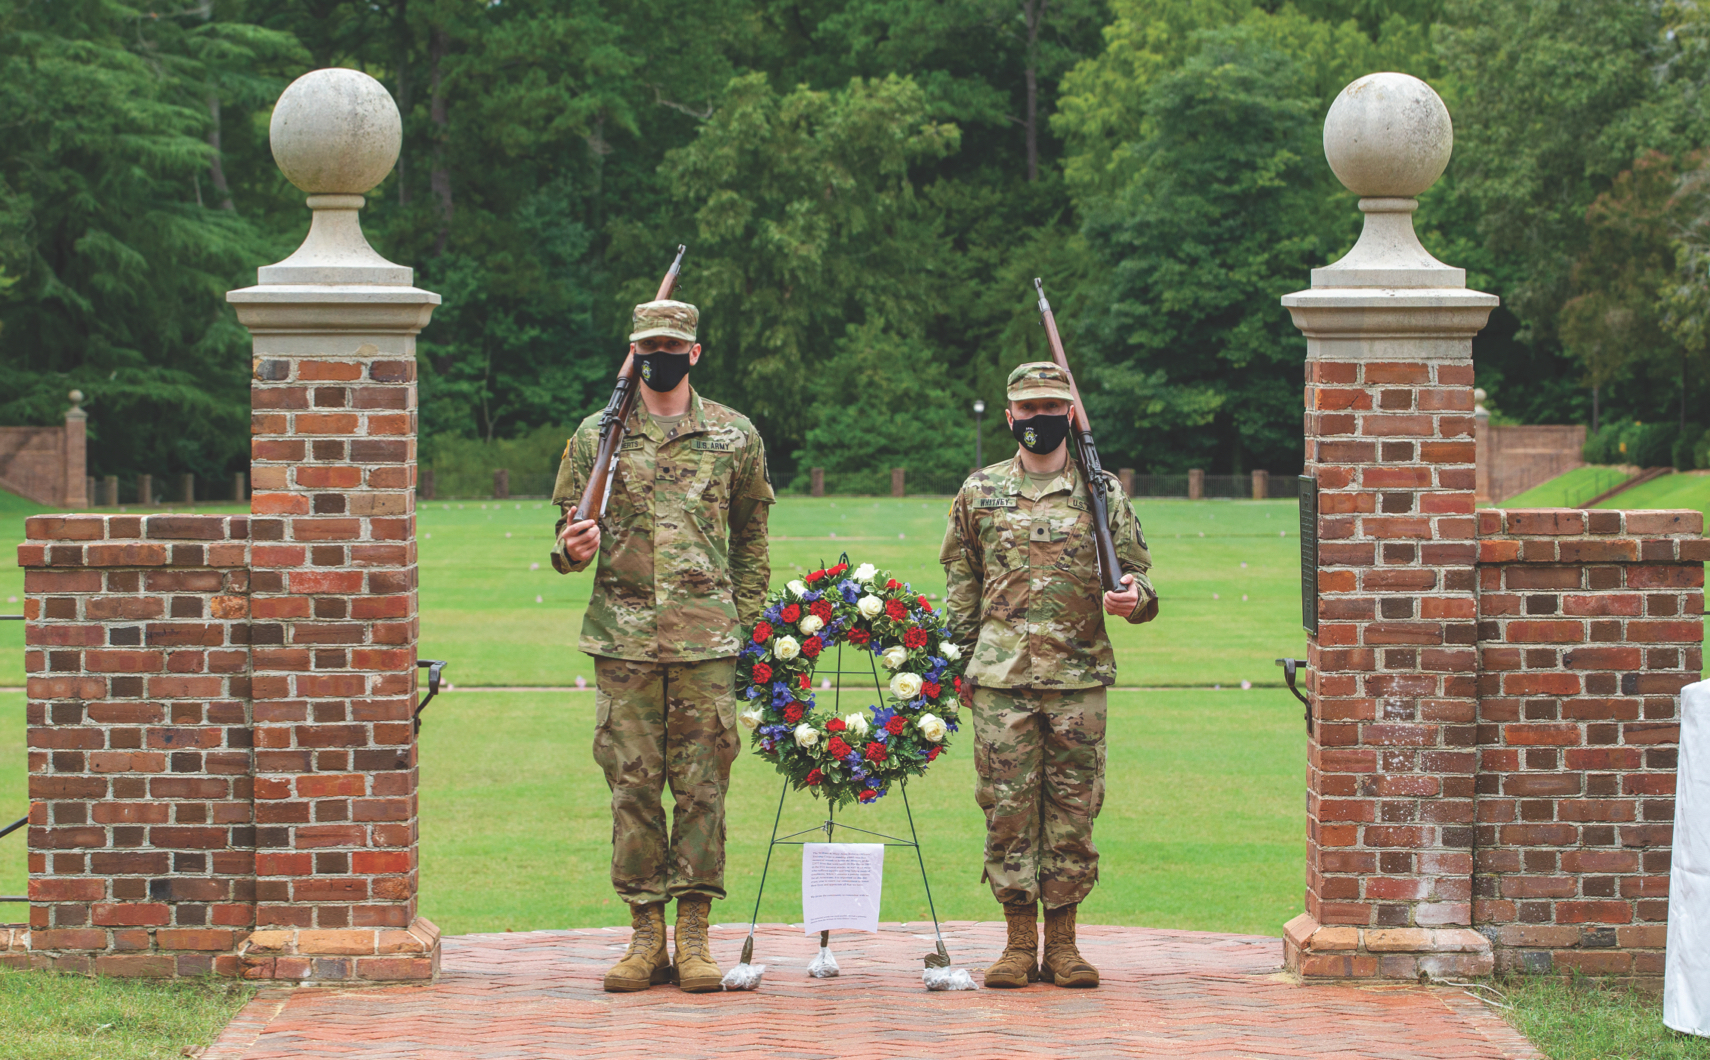 PAYING RESPECTS: Students stand guard with a wreath at the entrance of the Sunken Garden to honor the anniver- sary of 9/11.